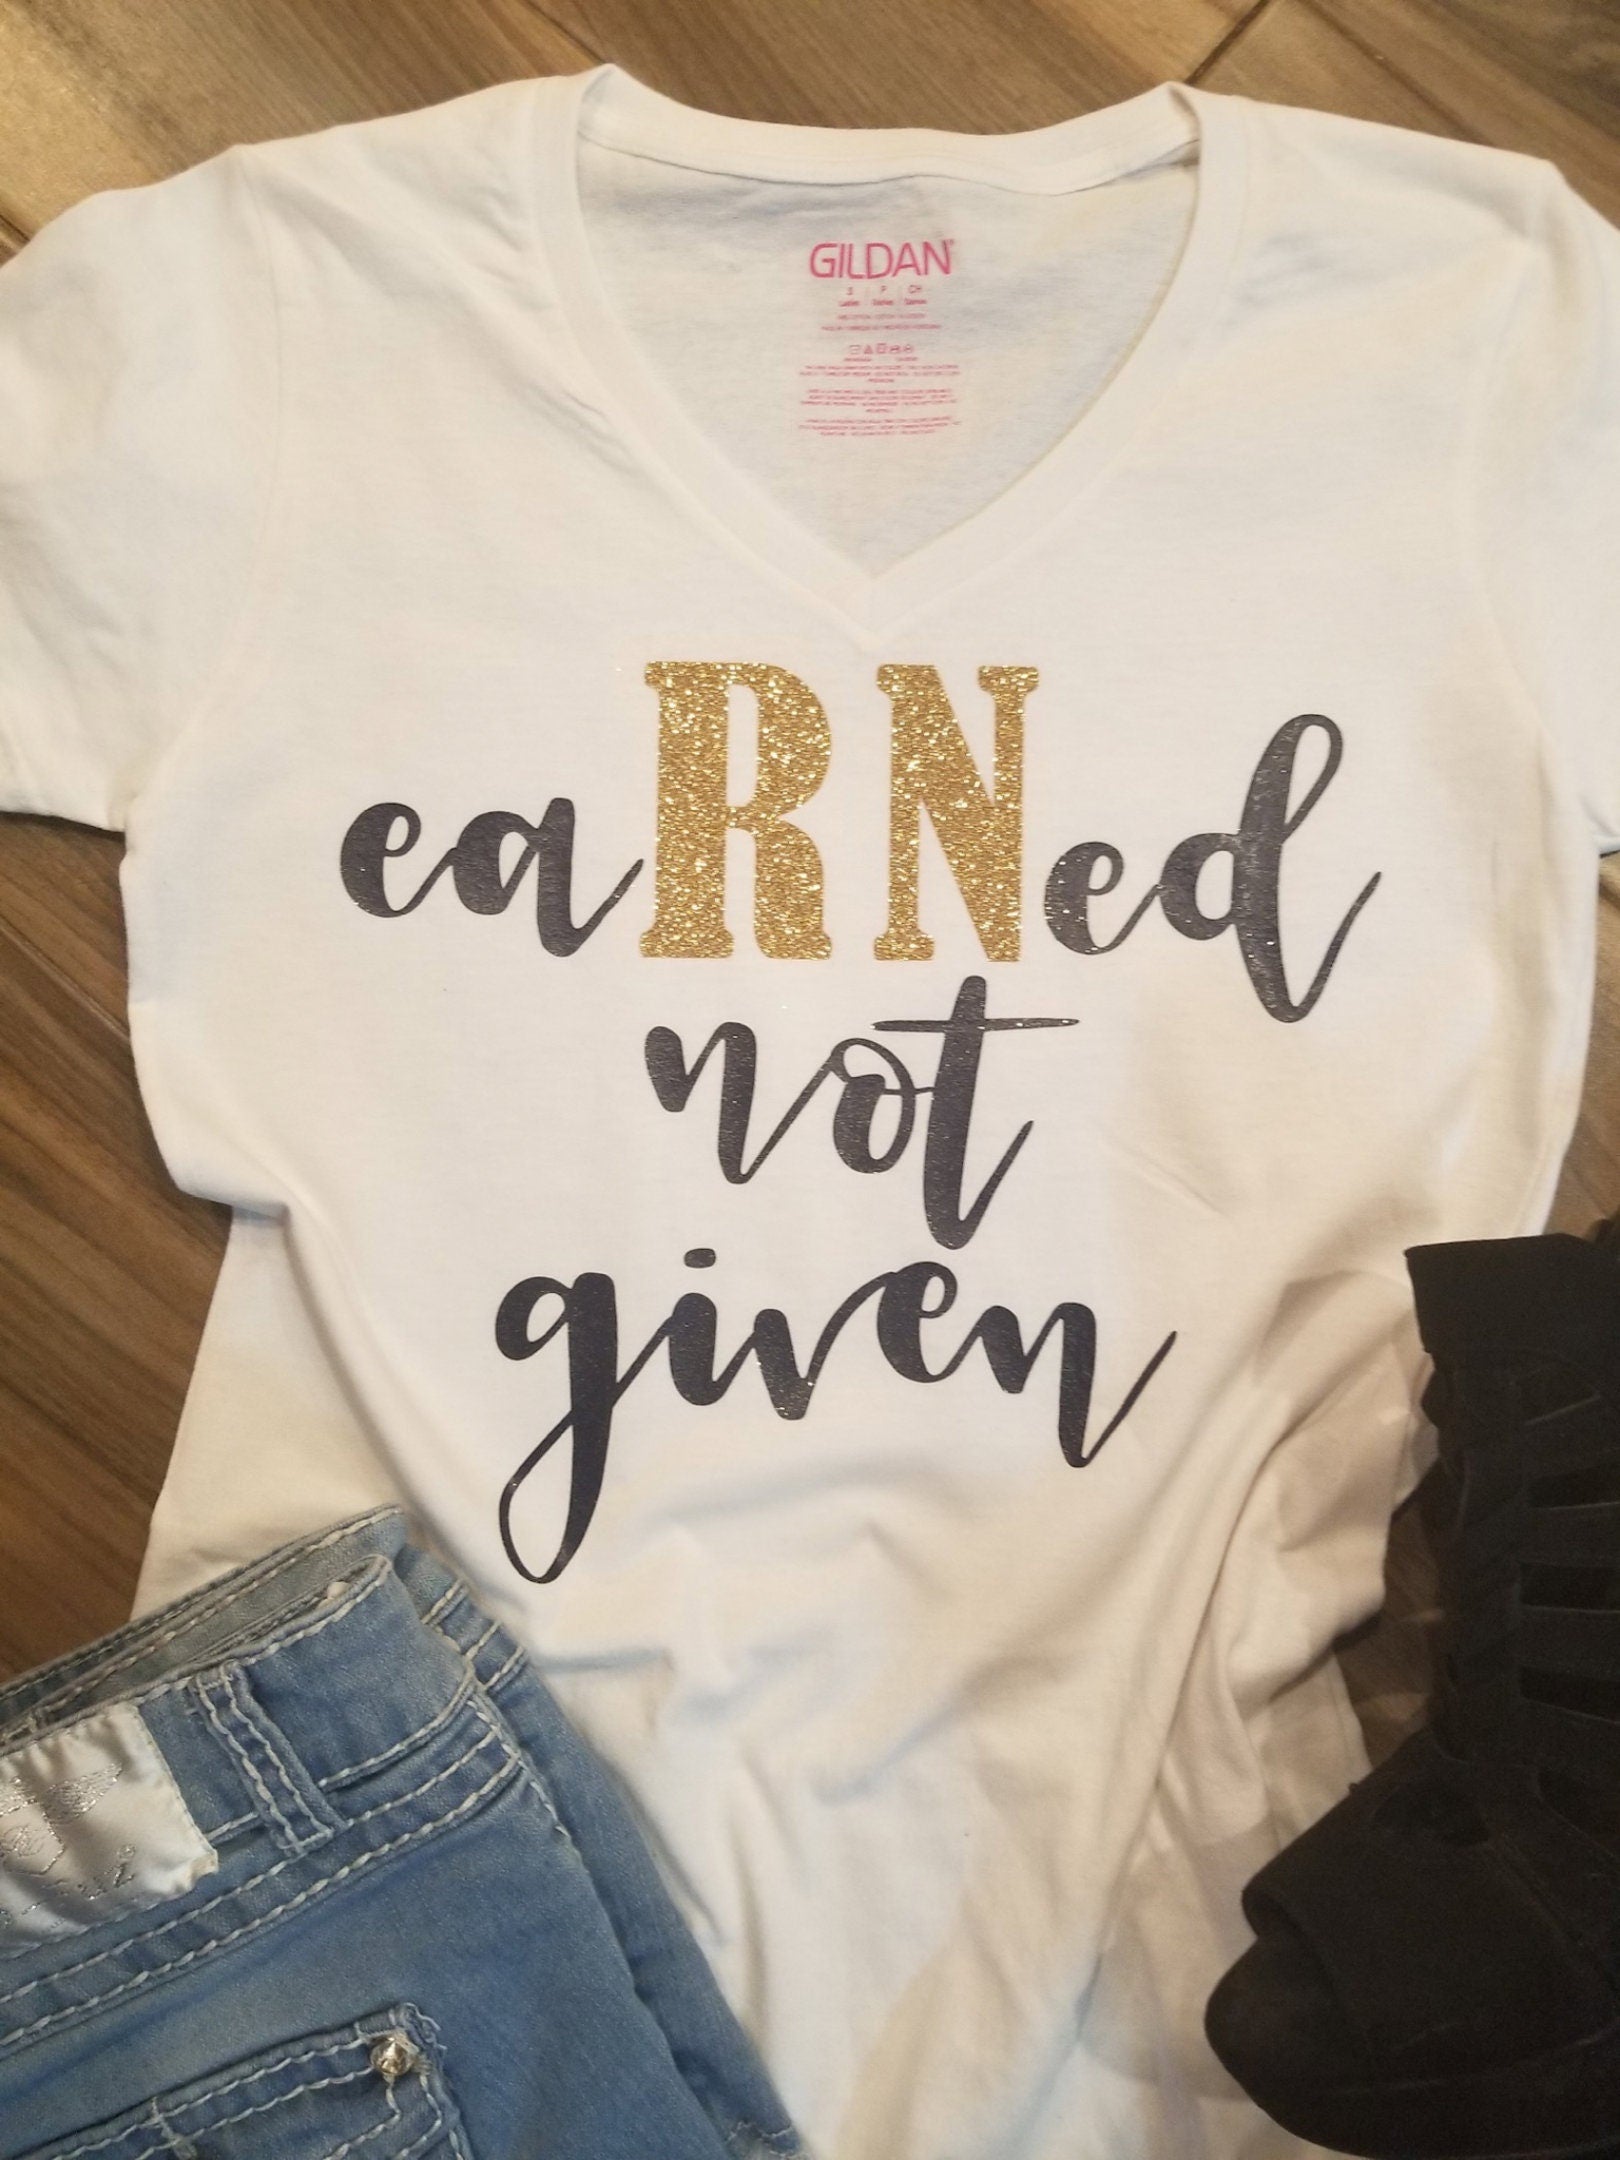 EaRNed Not Given Shirt